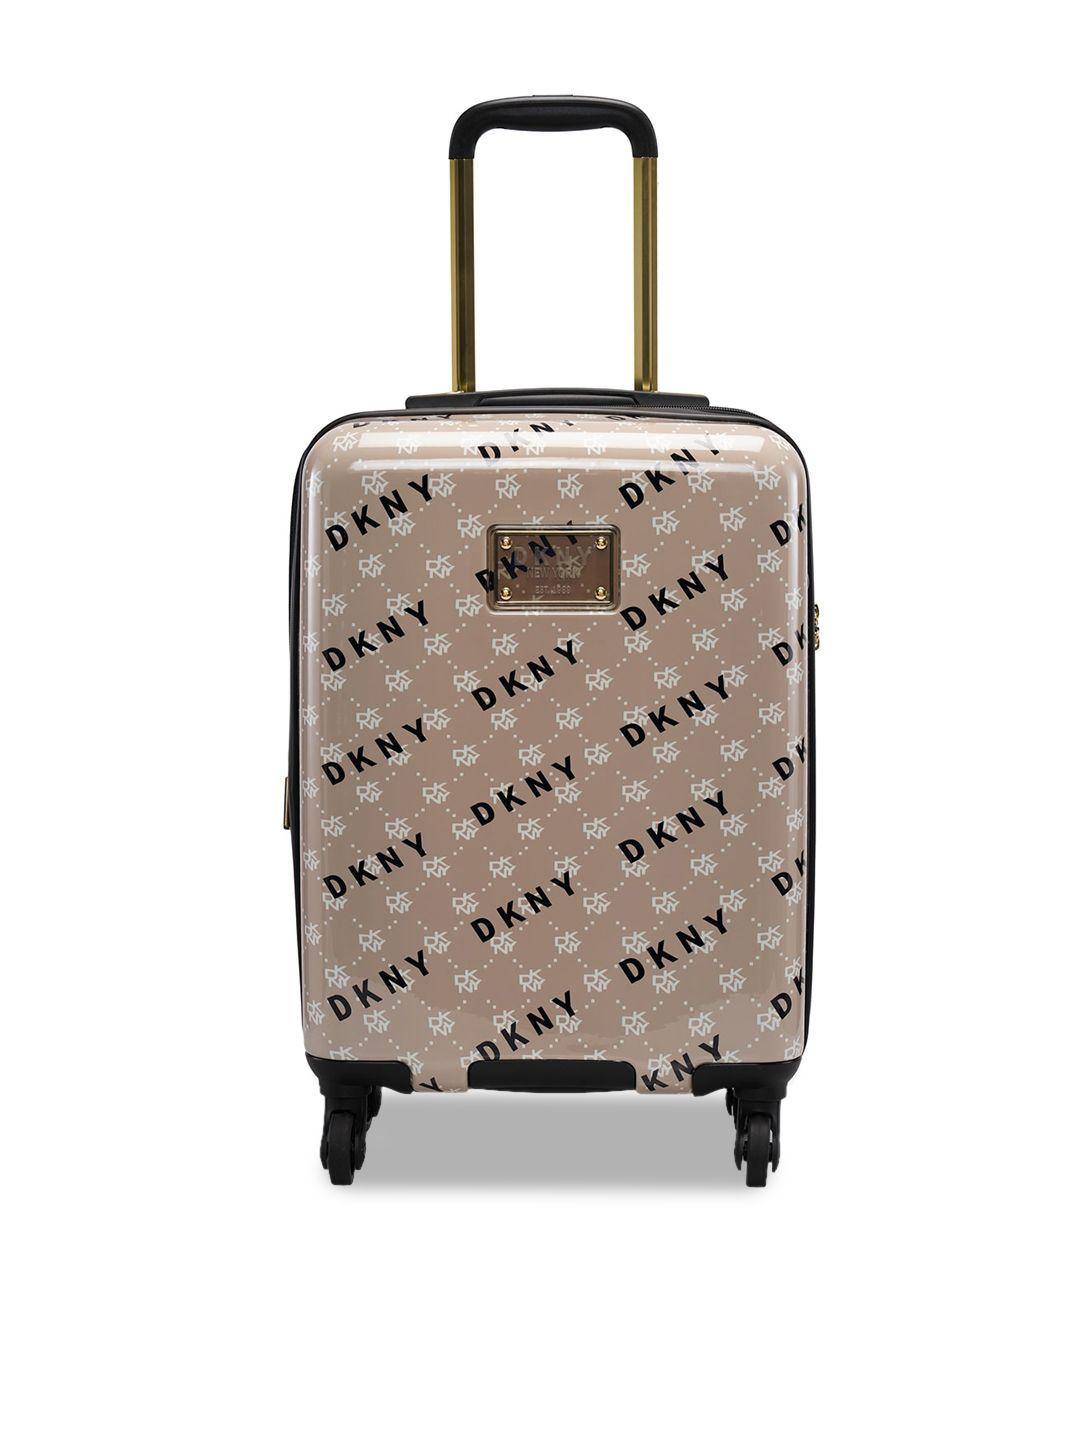 dkny printed abs material  soft-sided large trolley suitcase bag